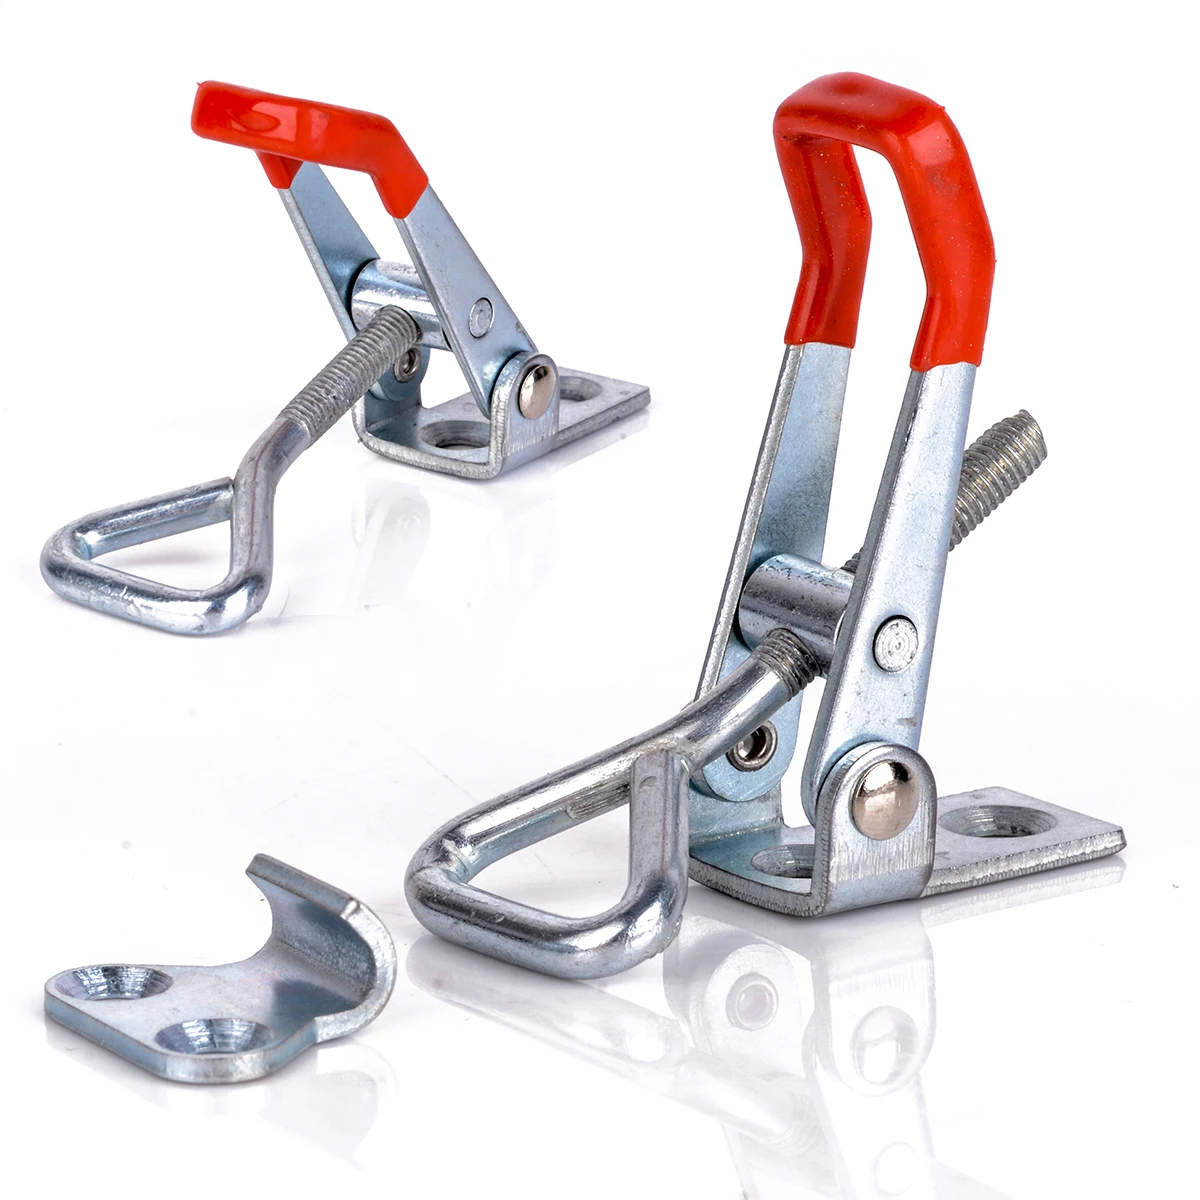 GH-4001 Quick Toggle Clamp Clip 150kg 330Lbs Holding Metal Latch Hand Tools ju